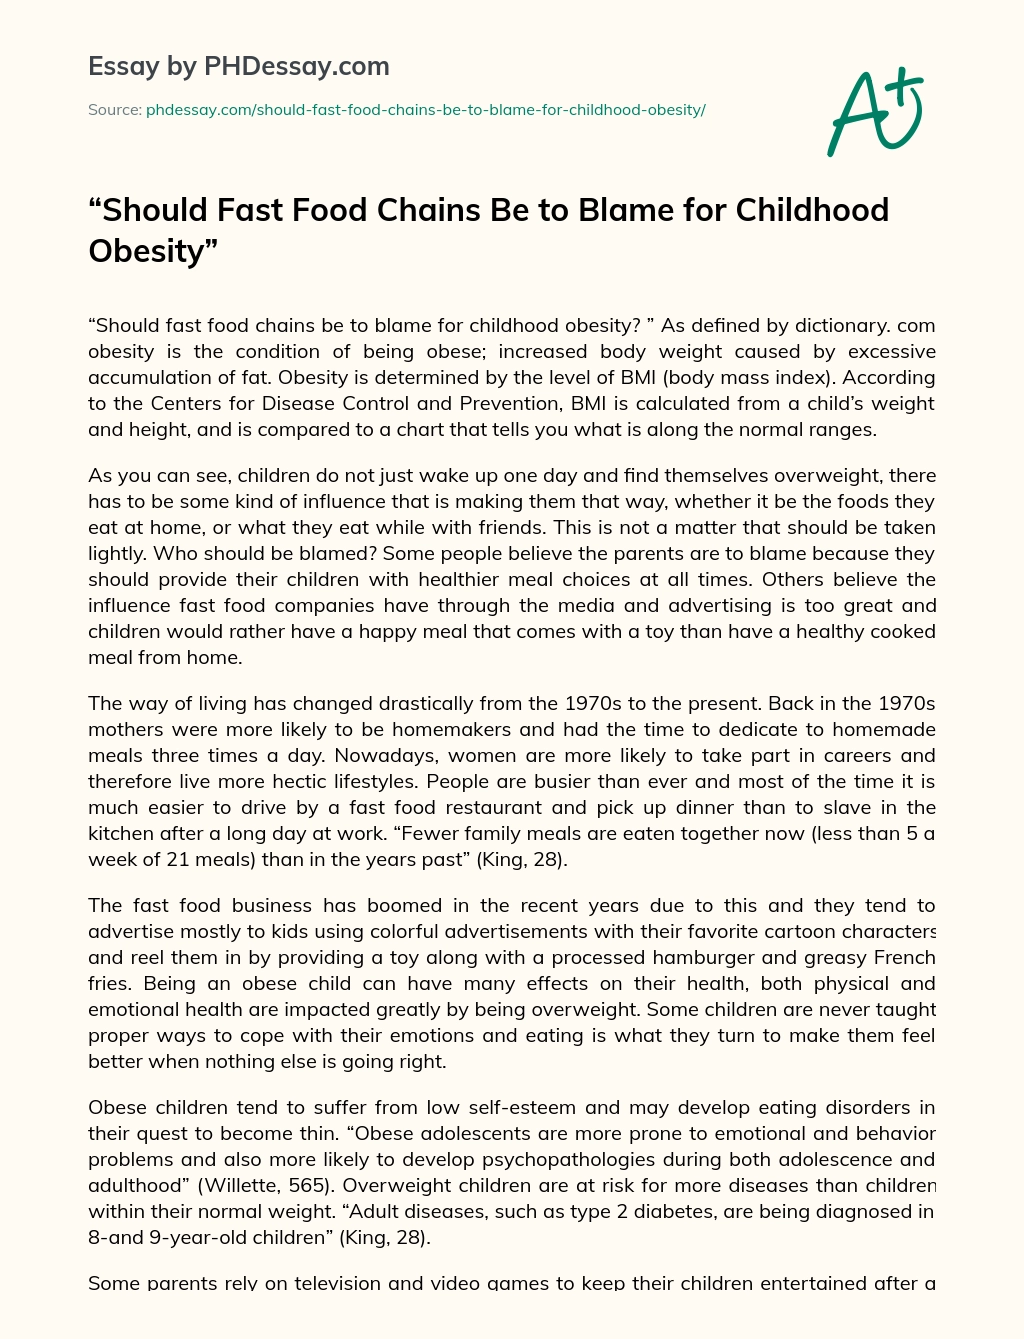 Should Fast Food Chains Be to Blame for Childhood Obesity essay